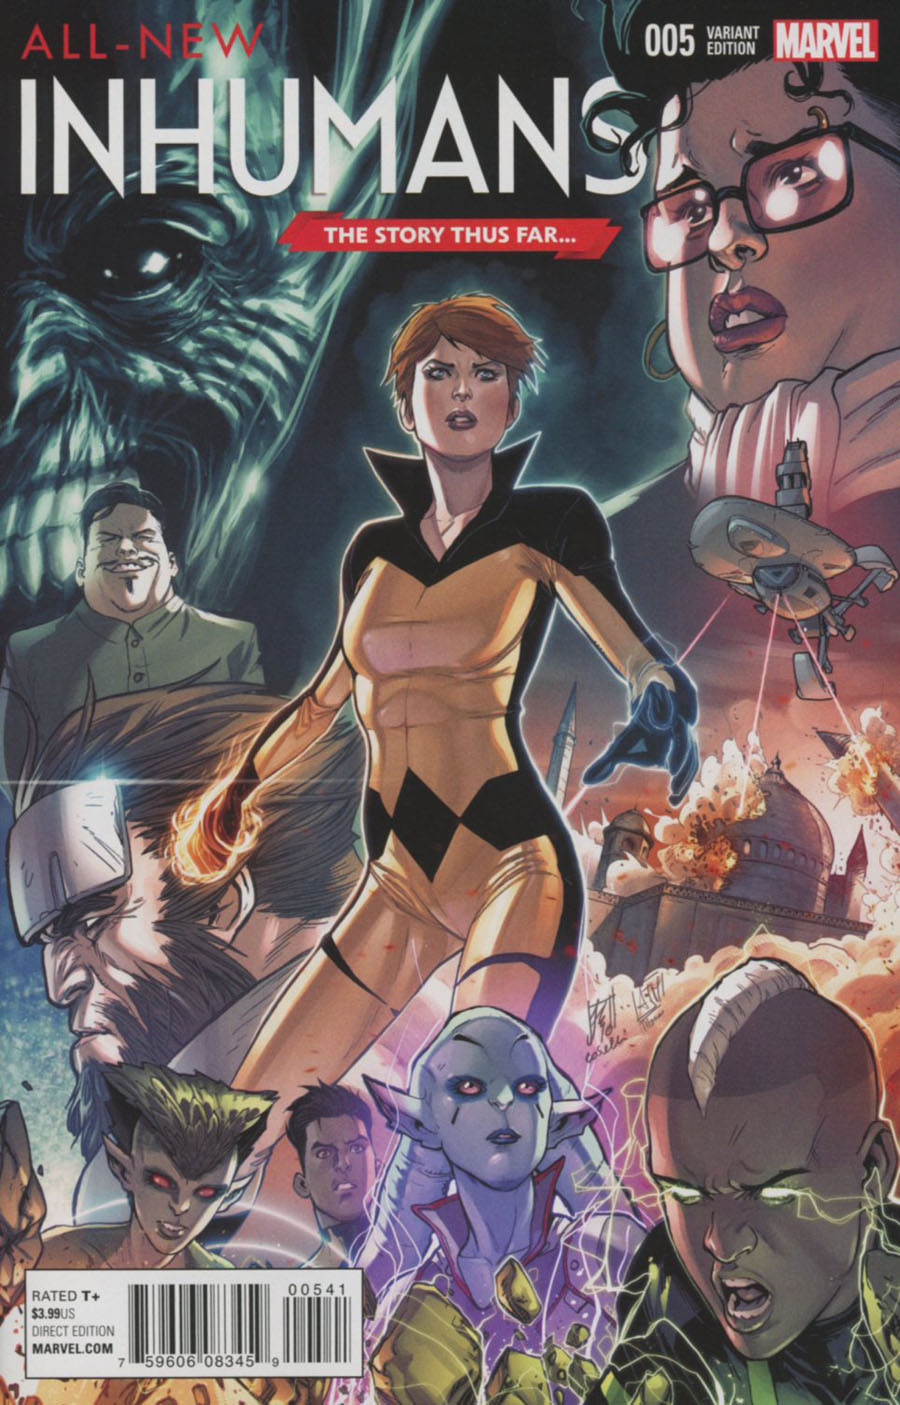 All-New Inhumans #5 Cover B Variant Story Thus Far Cover